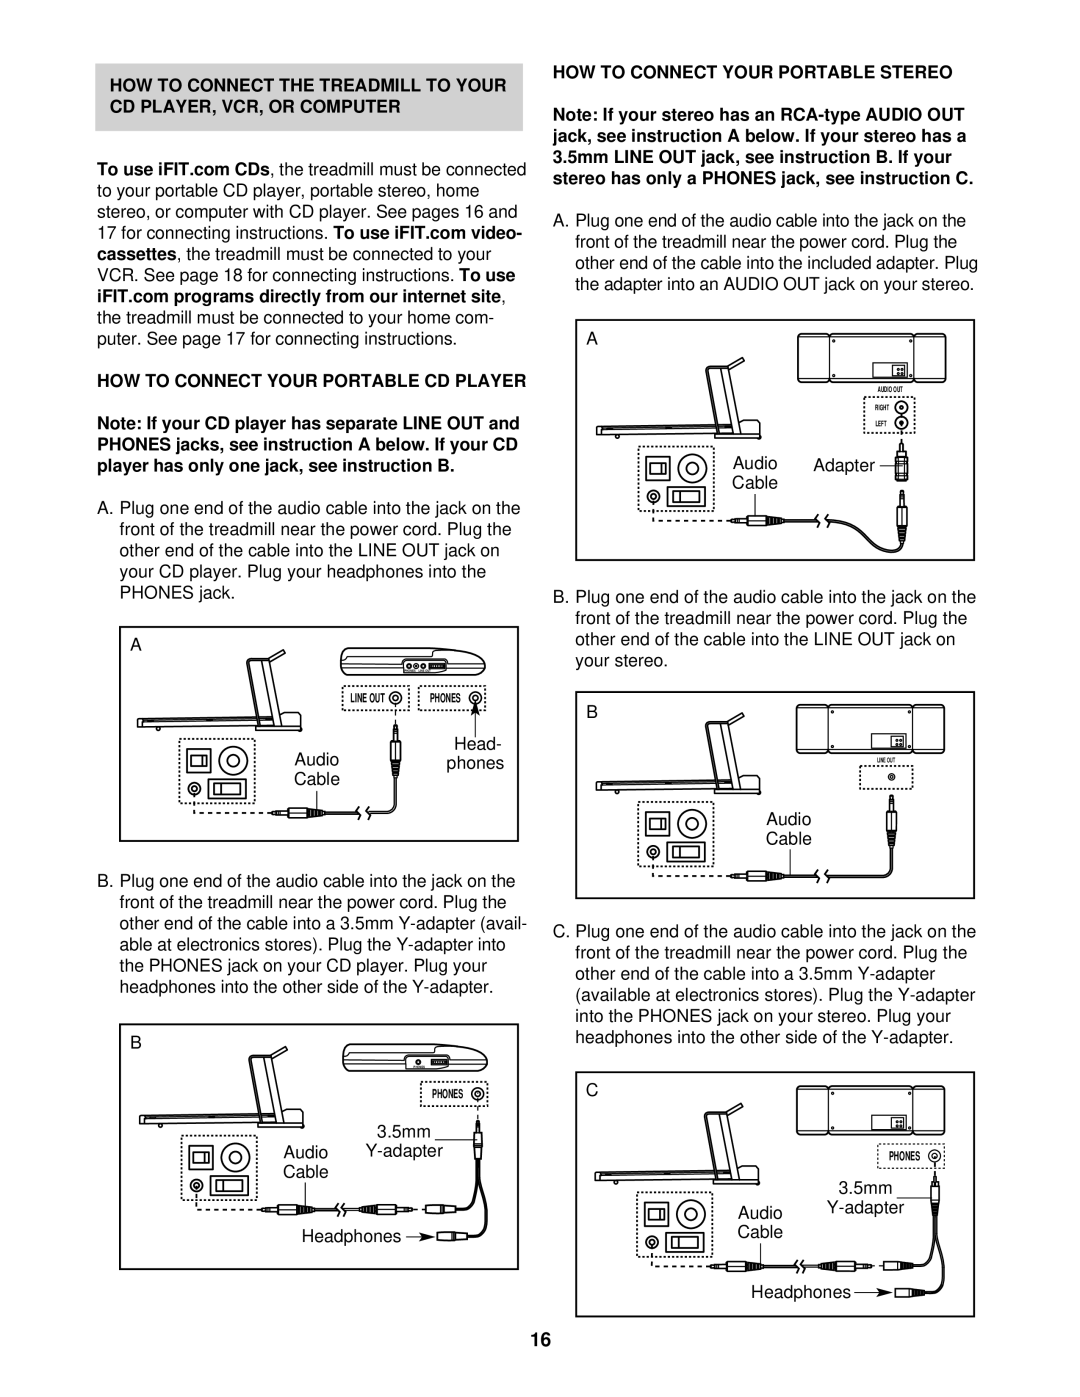 ProForm PFTL59822 user manual Cassettes, HOW to Connect Your Portable CD Player, HOW to Connect Your Portable Stereo 